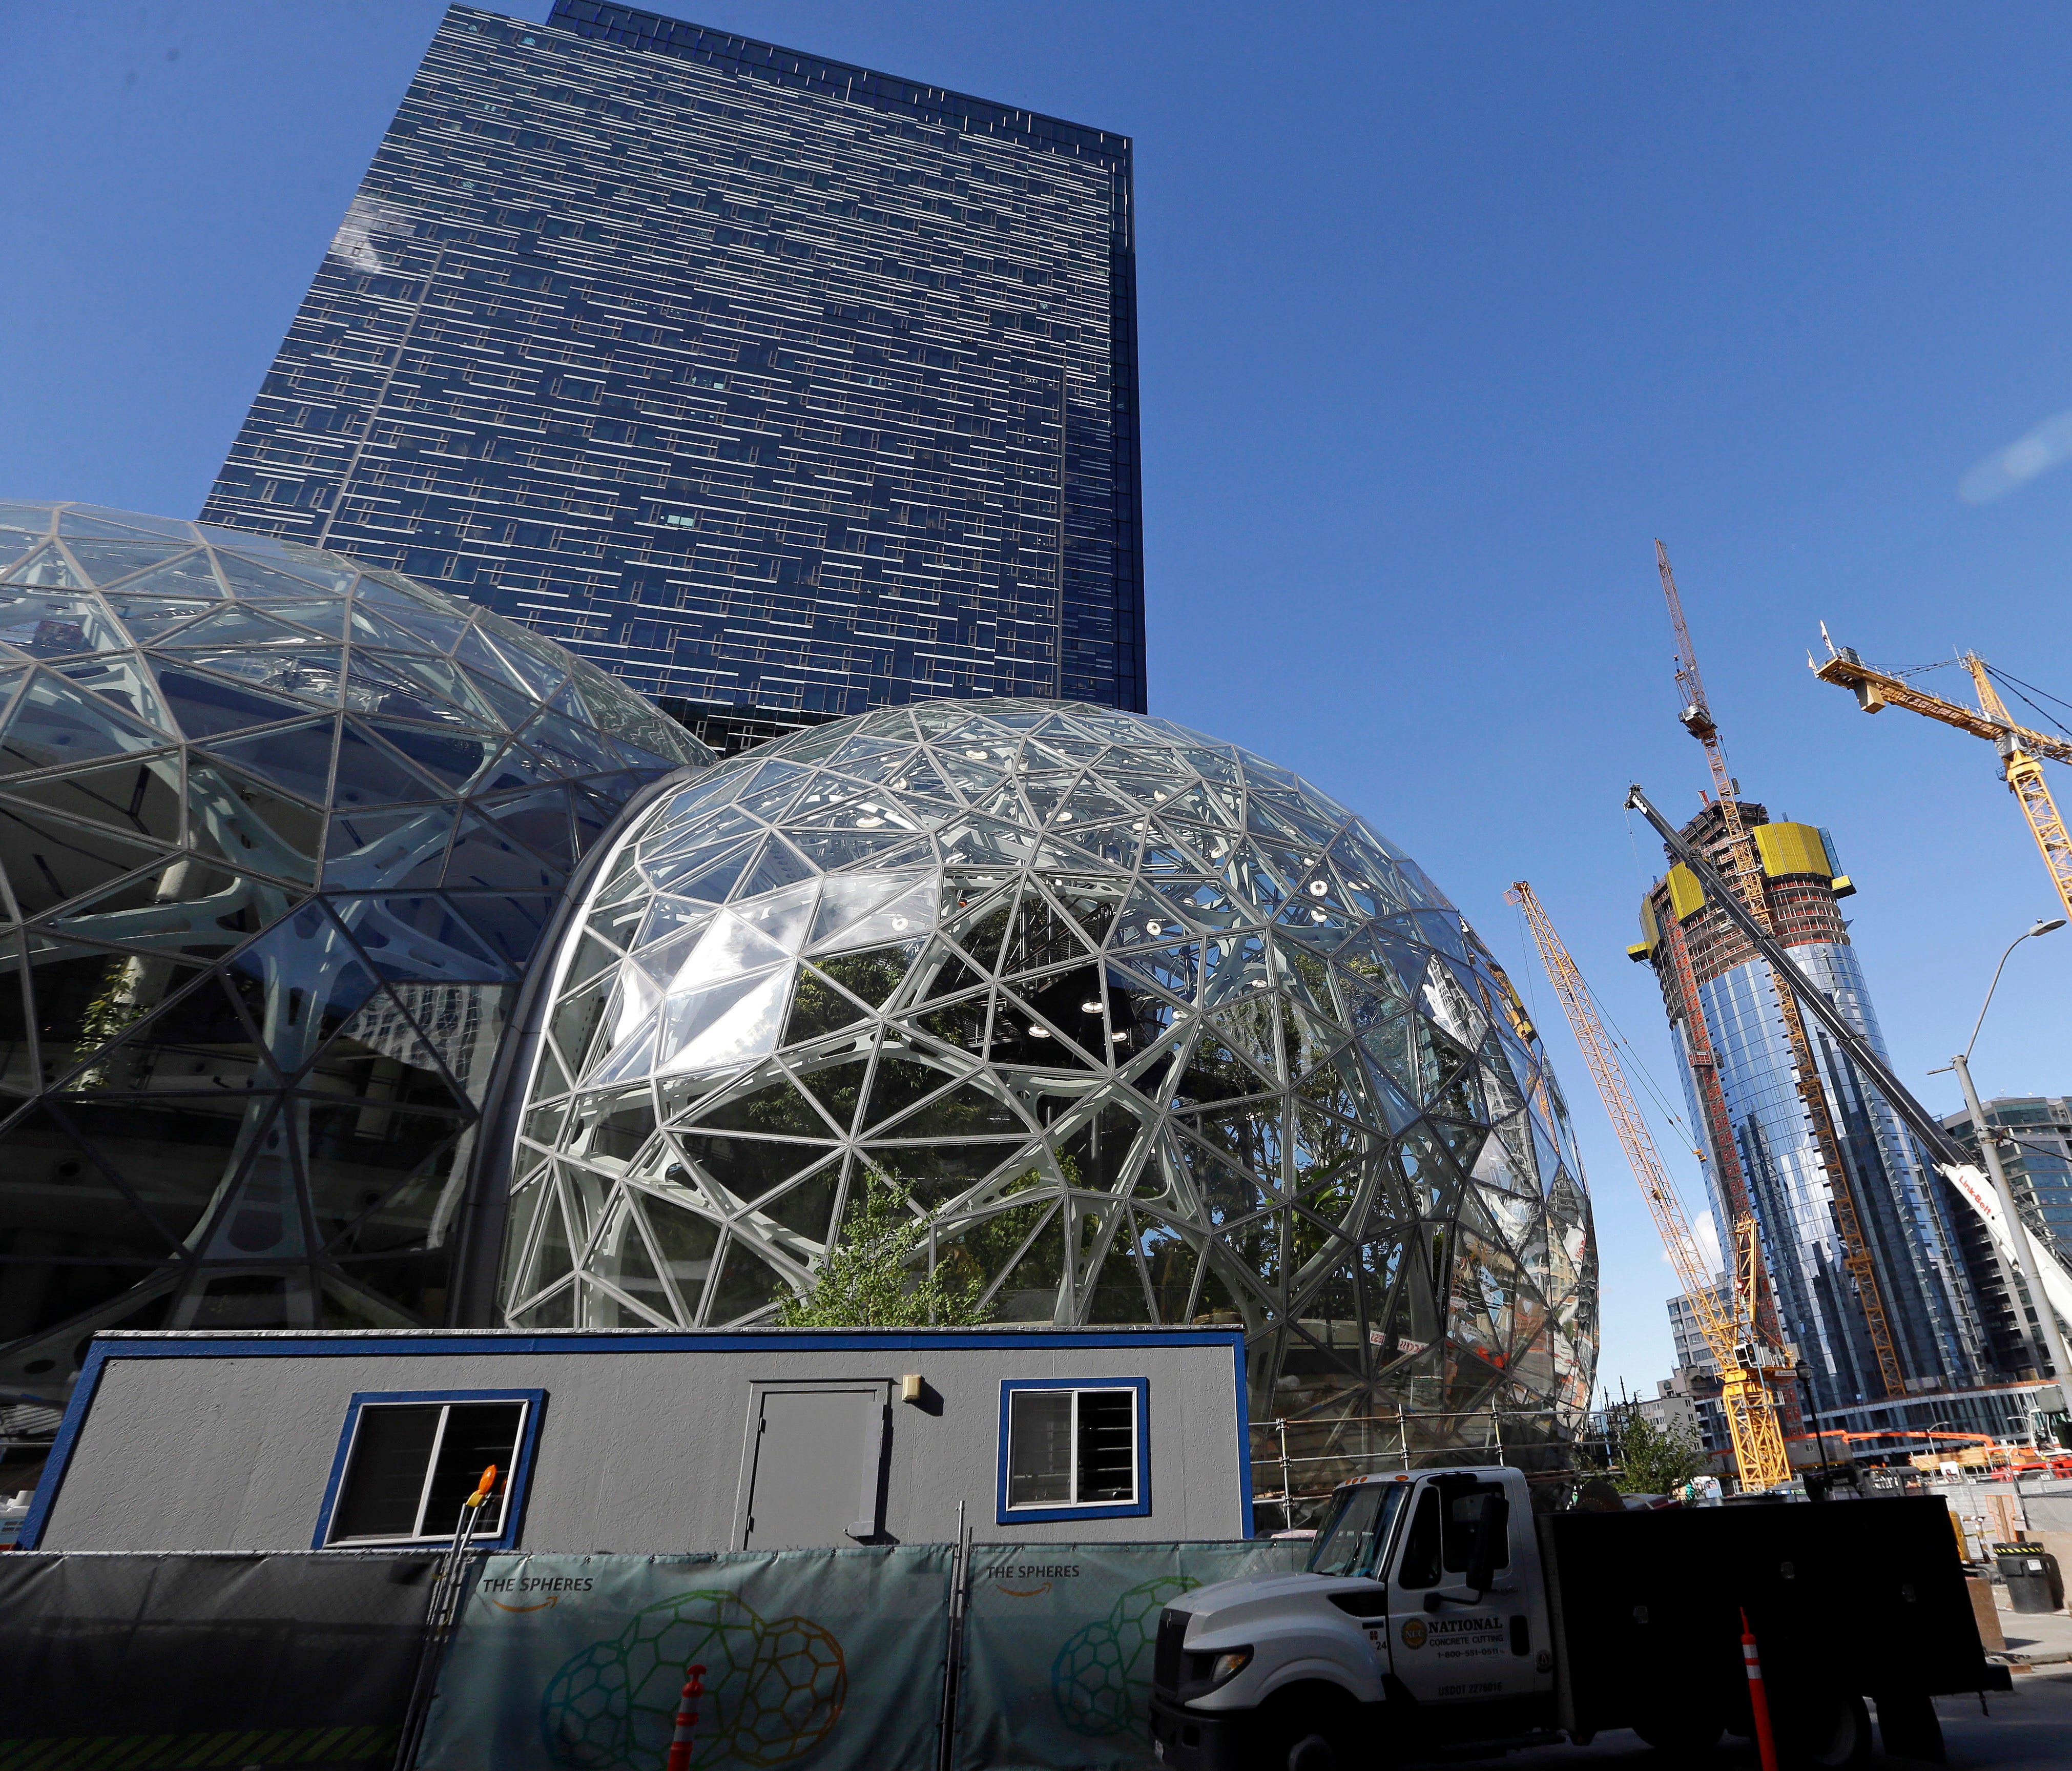 The Amazon building in Seattle. Memo to the many places vying for Amazon's second headquarters: It ain't all food trucks and free bananas. For years now, much of downtown Seattle has been a maze of broken streets and caution-taped sidewalks, with doz